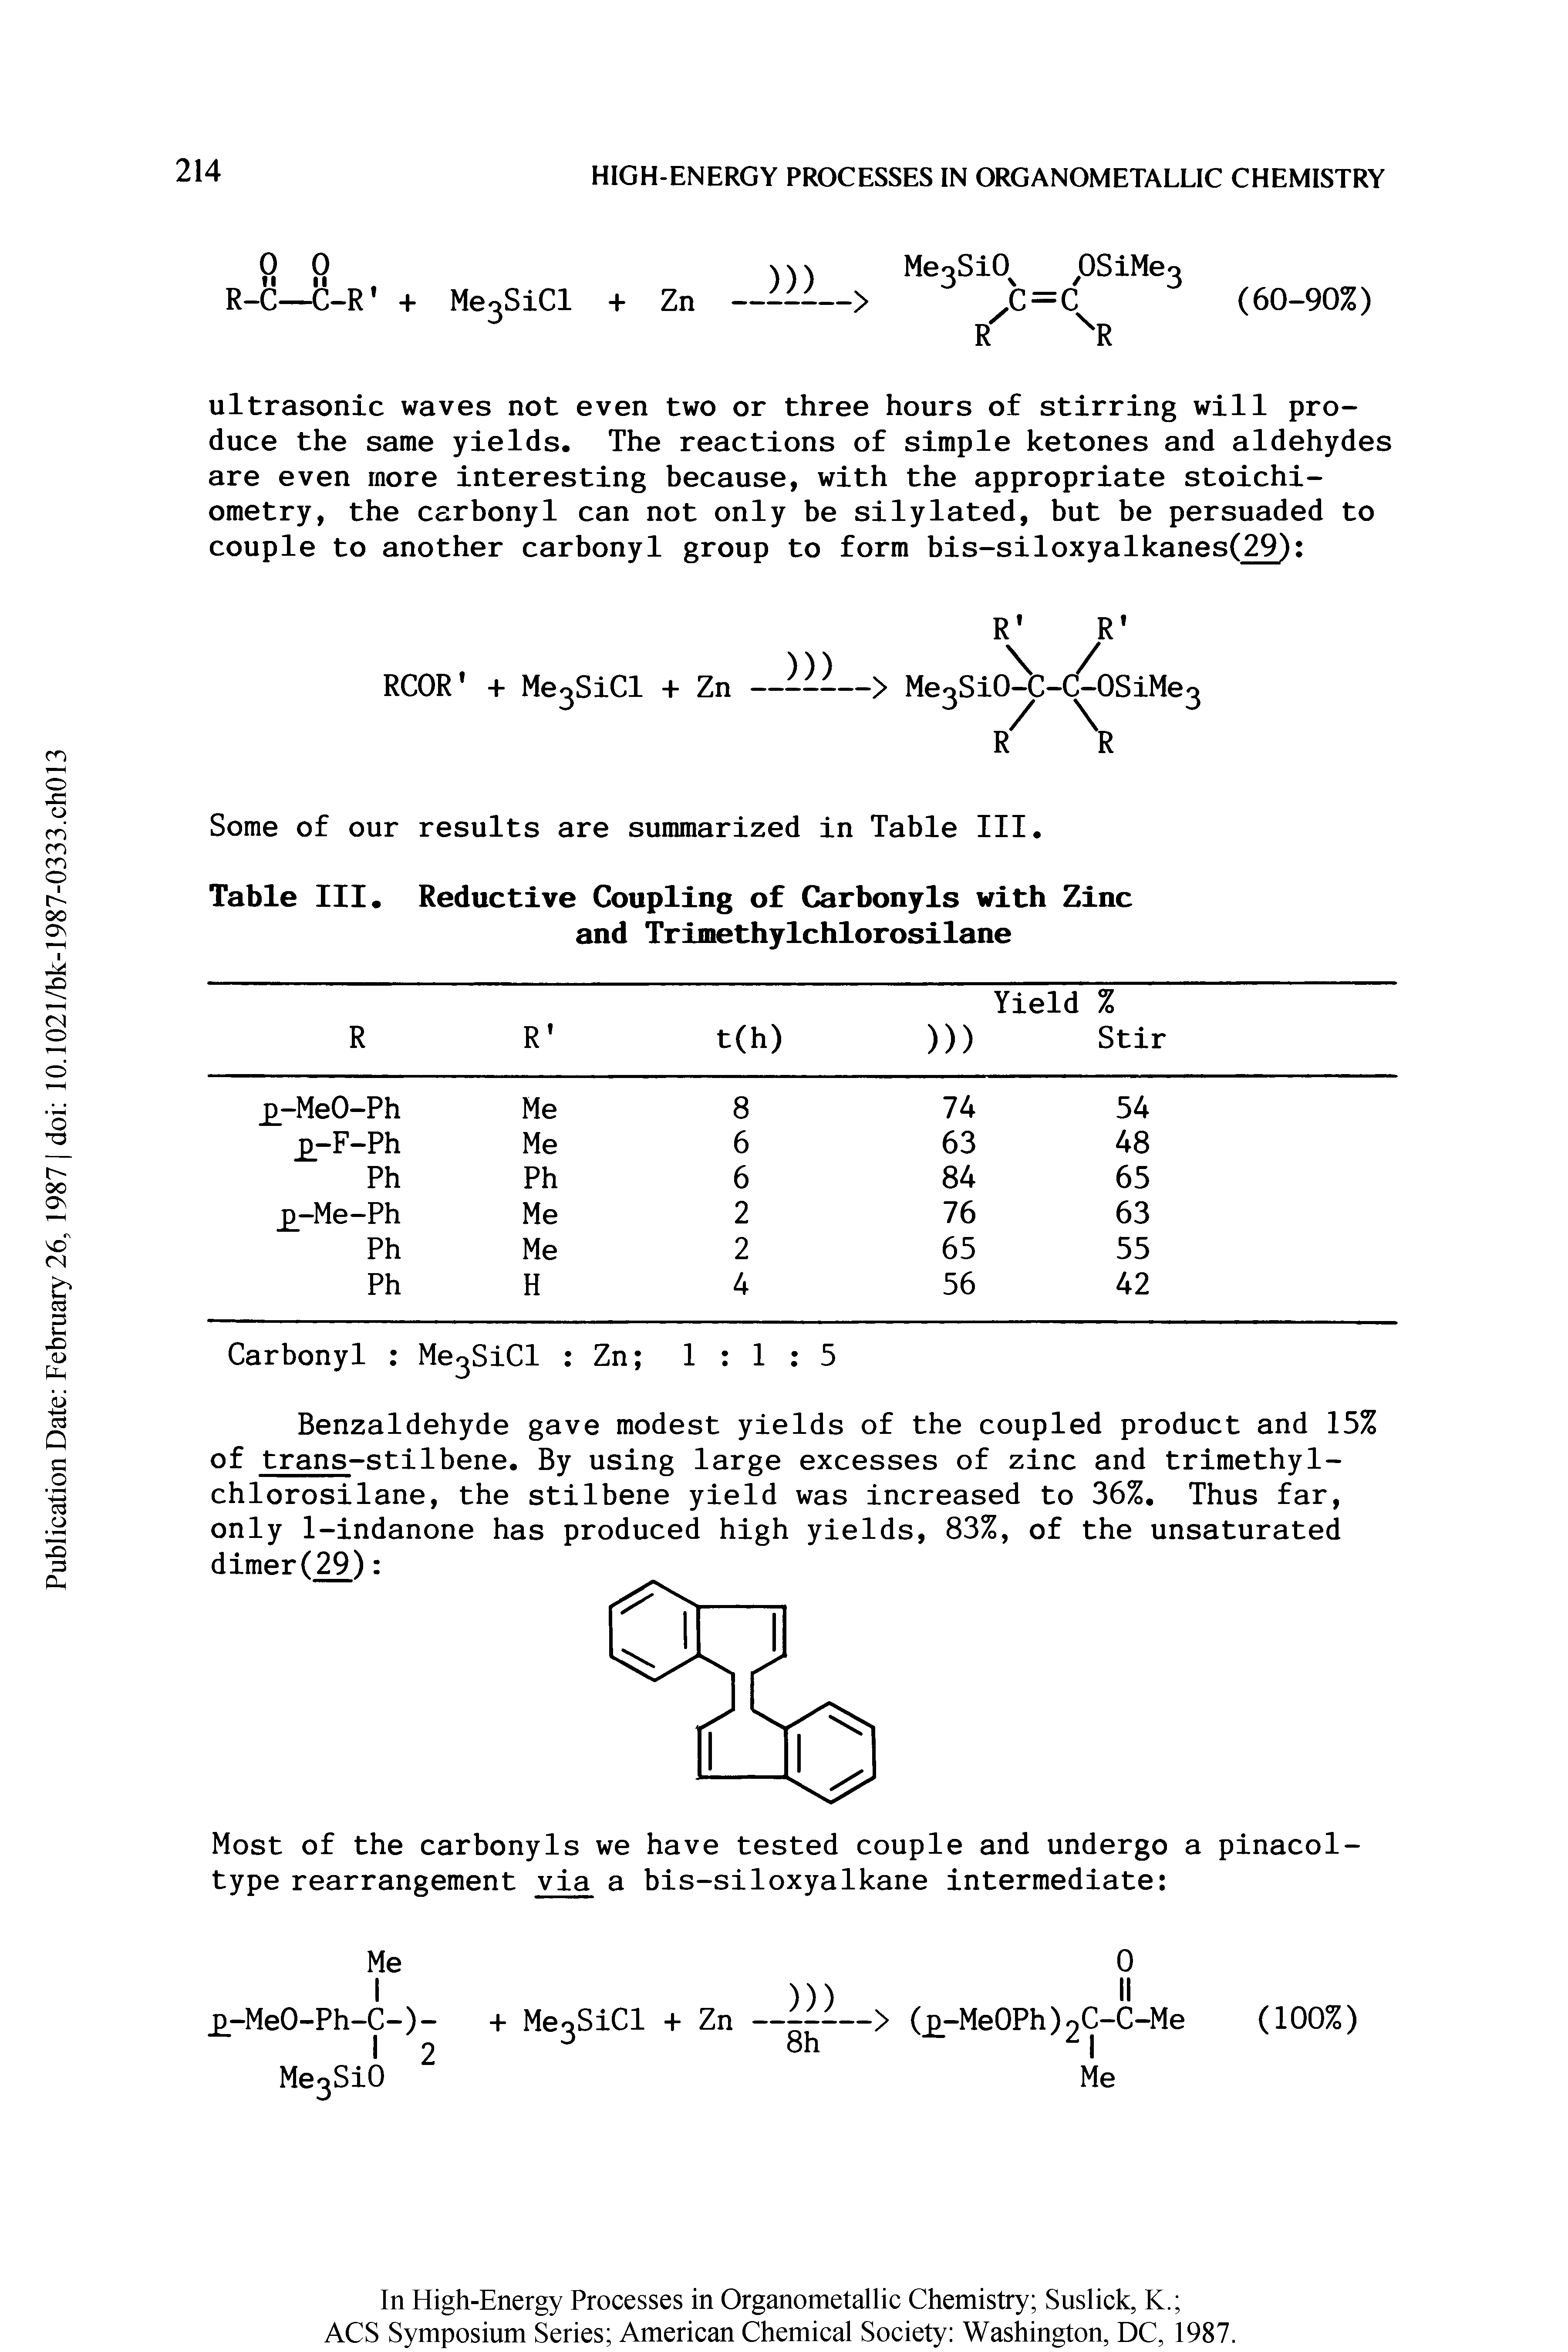 Table III. Reductive Coupling of Carbonyls with Zinc and Trimethylchlorosilane...